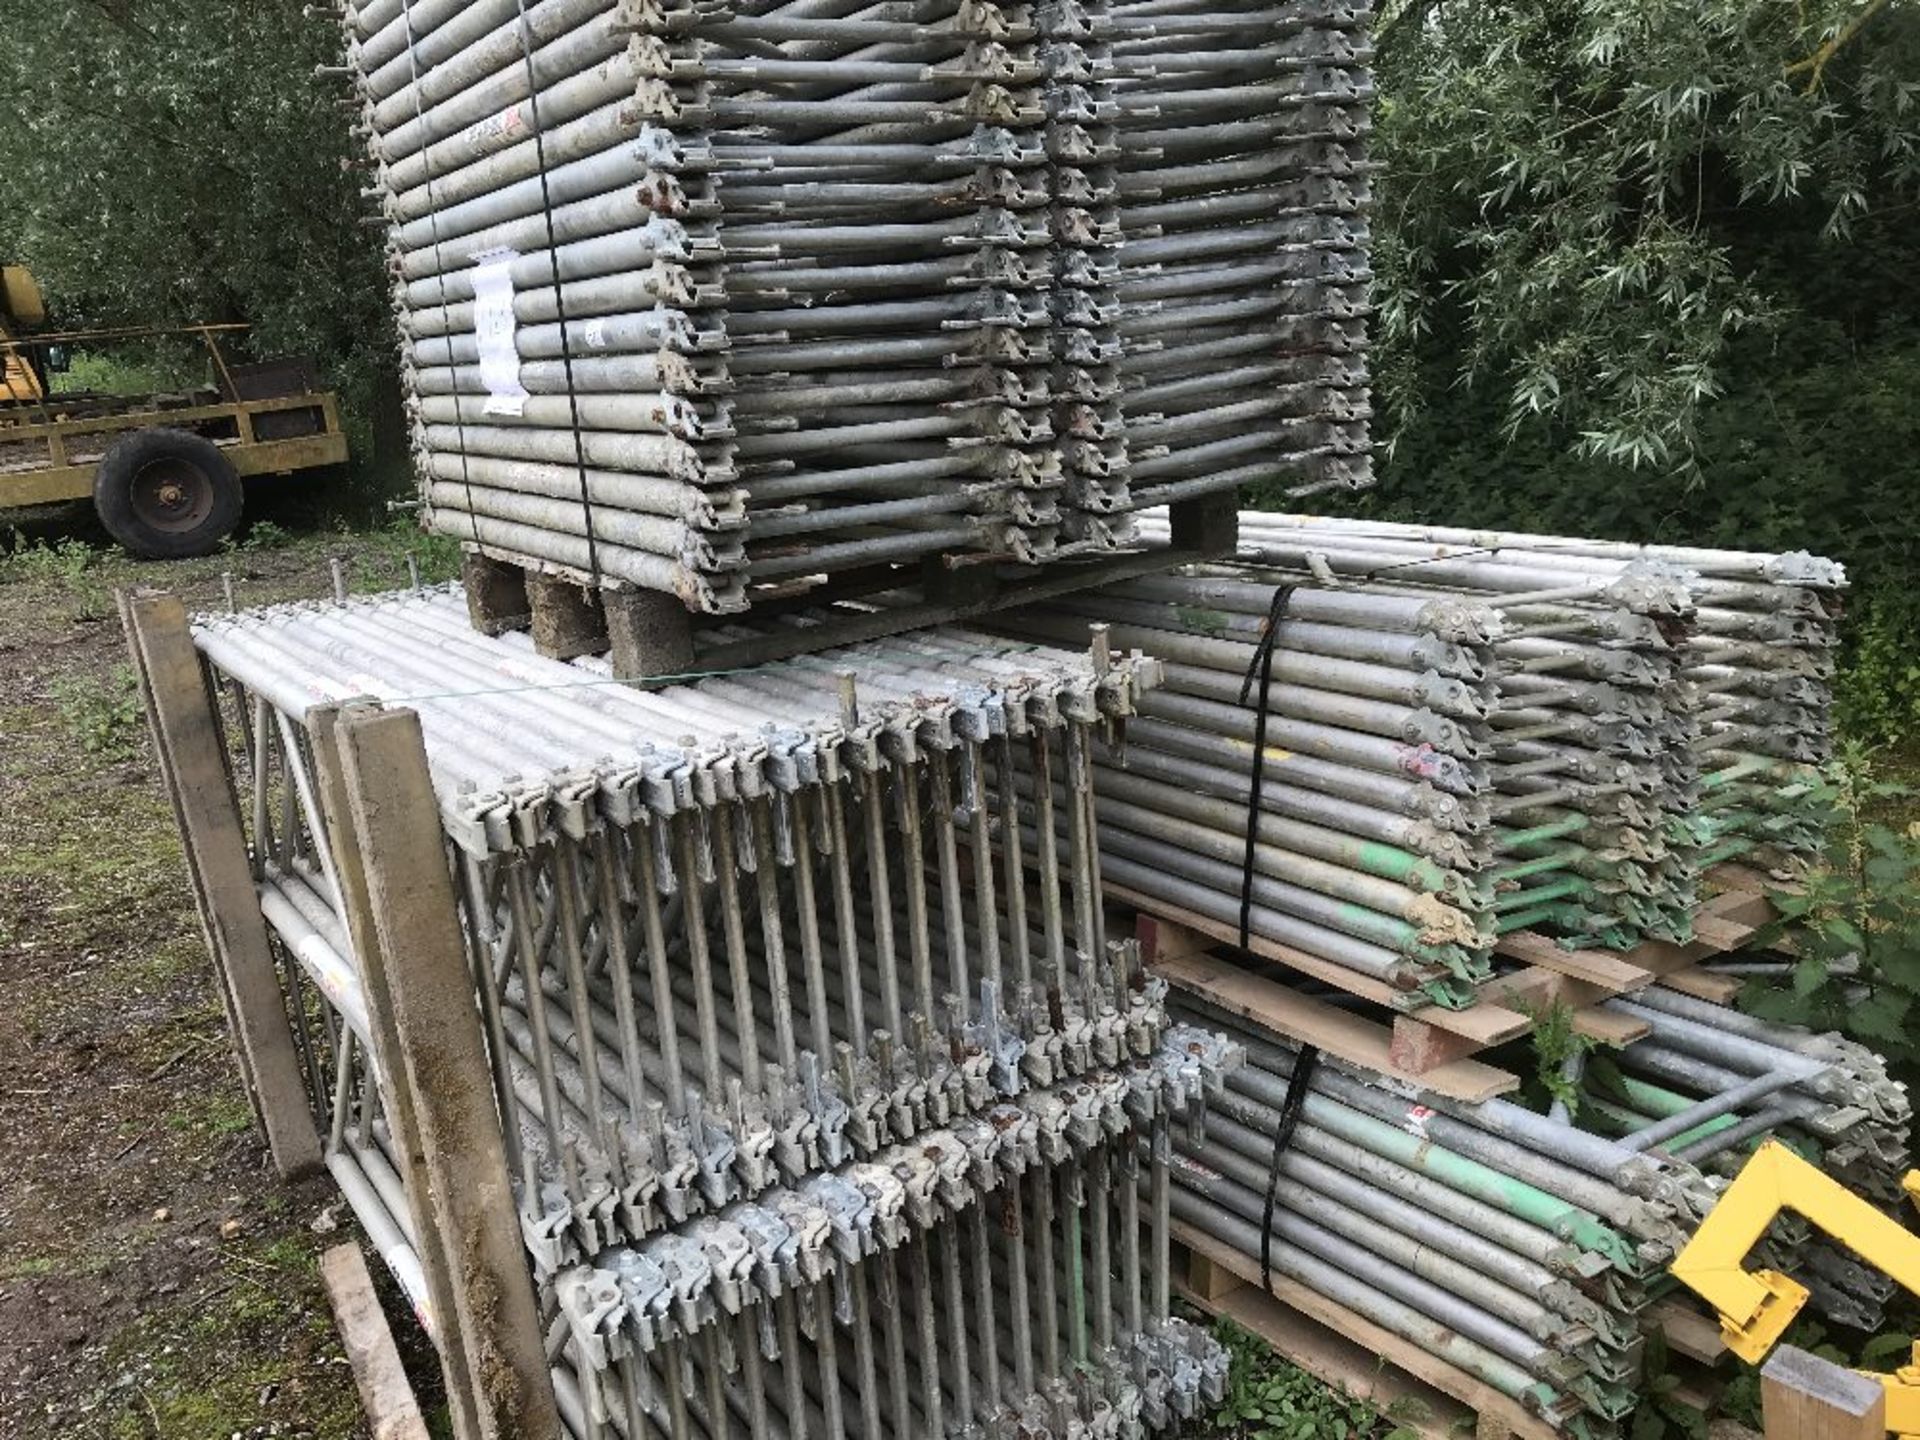 4NO PALLETS OF PERI MRK201,120 AND 150 SUPPORT FRAMES.